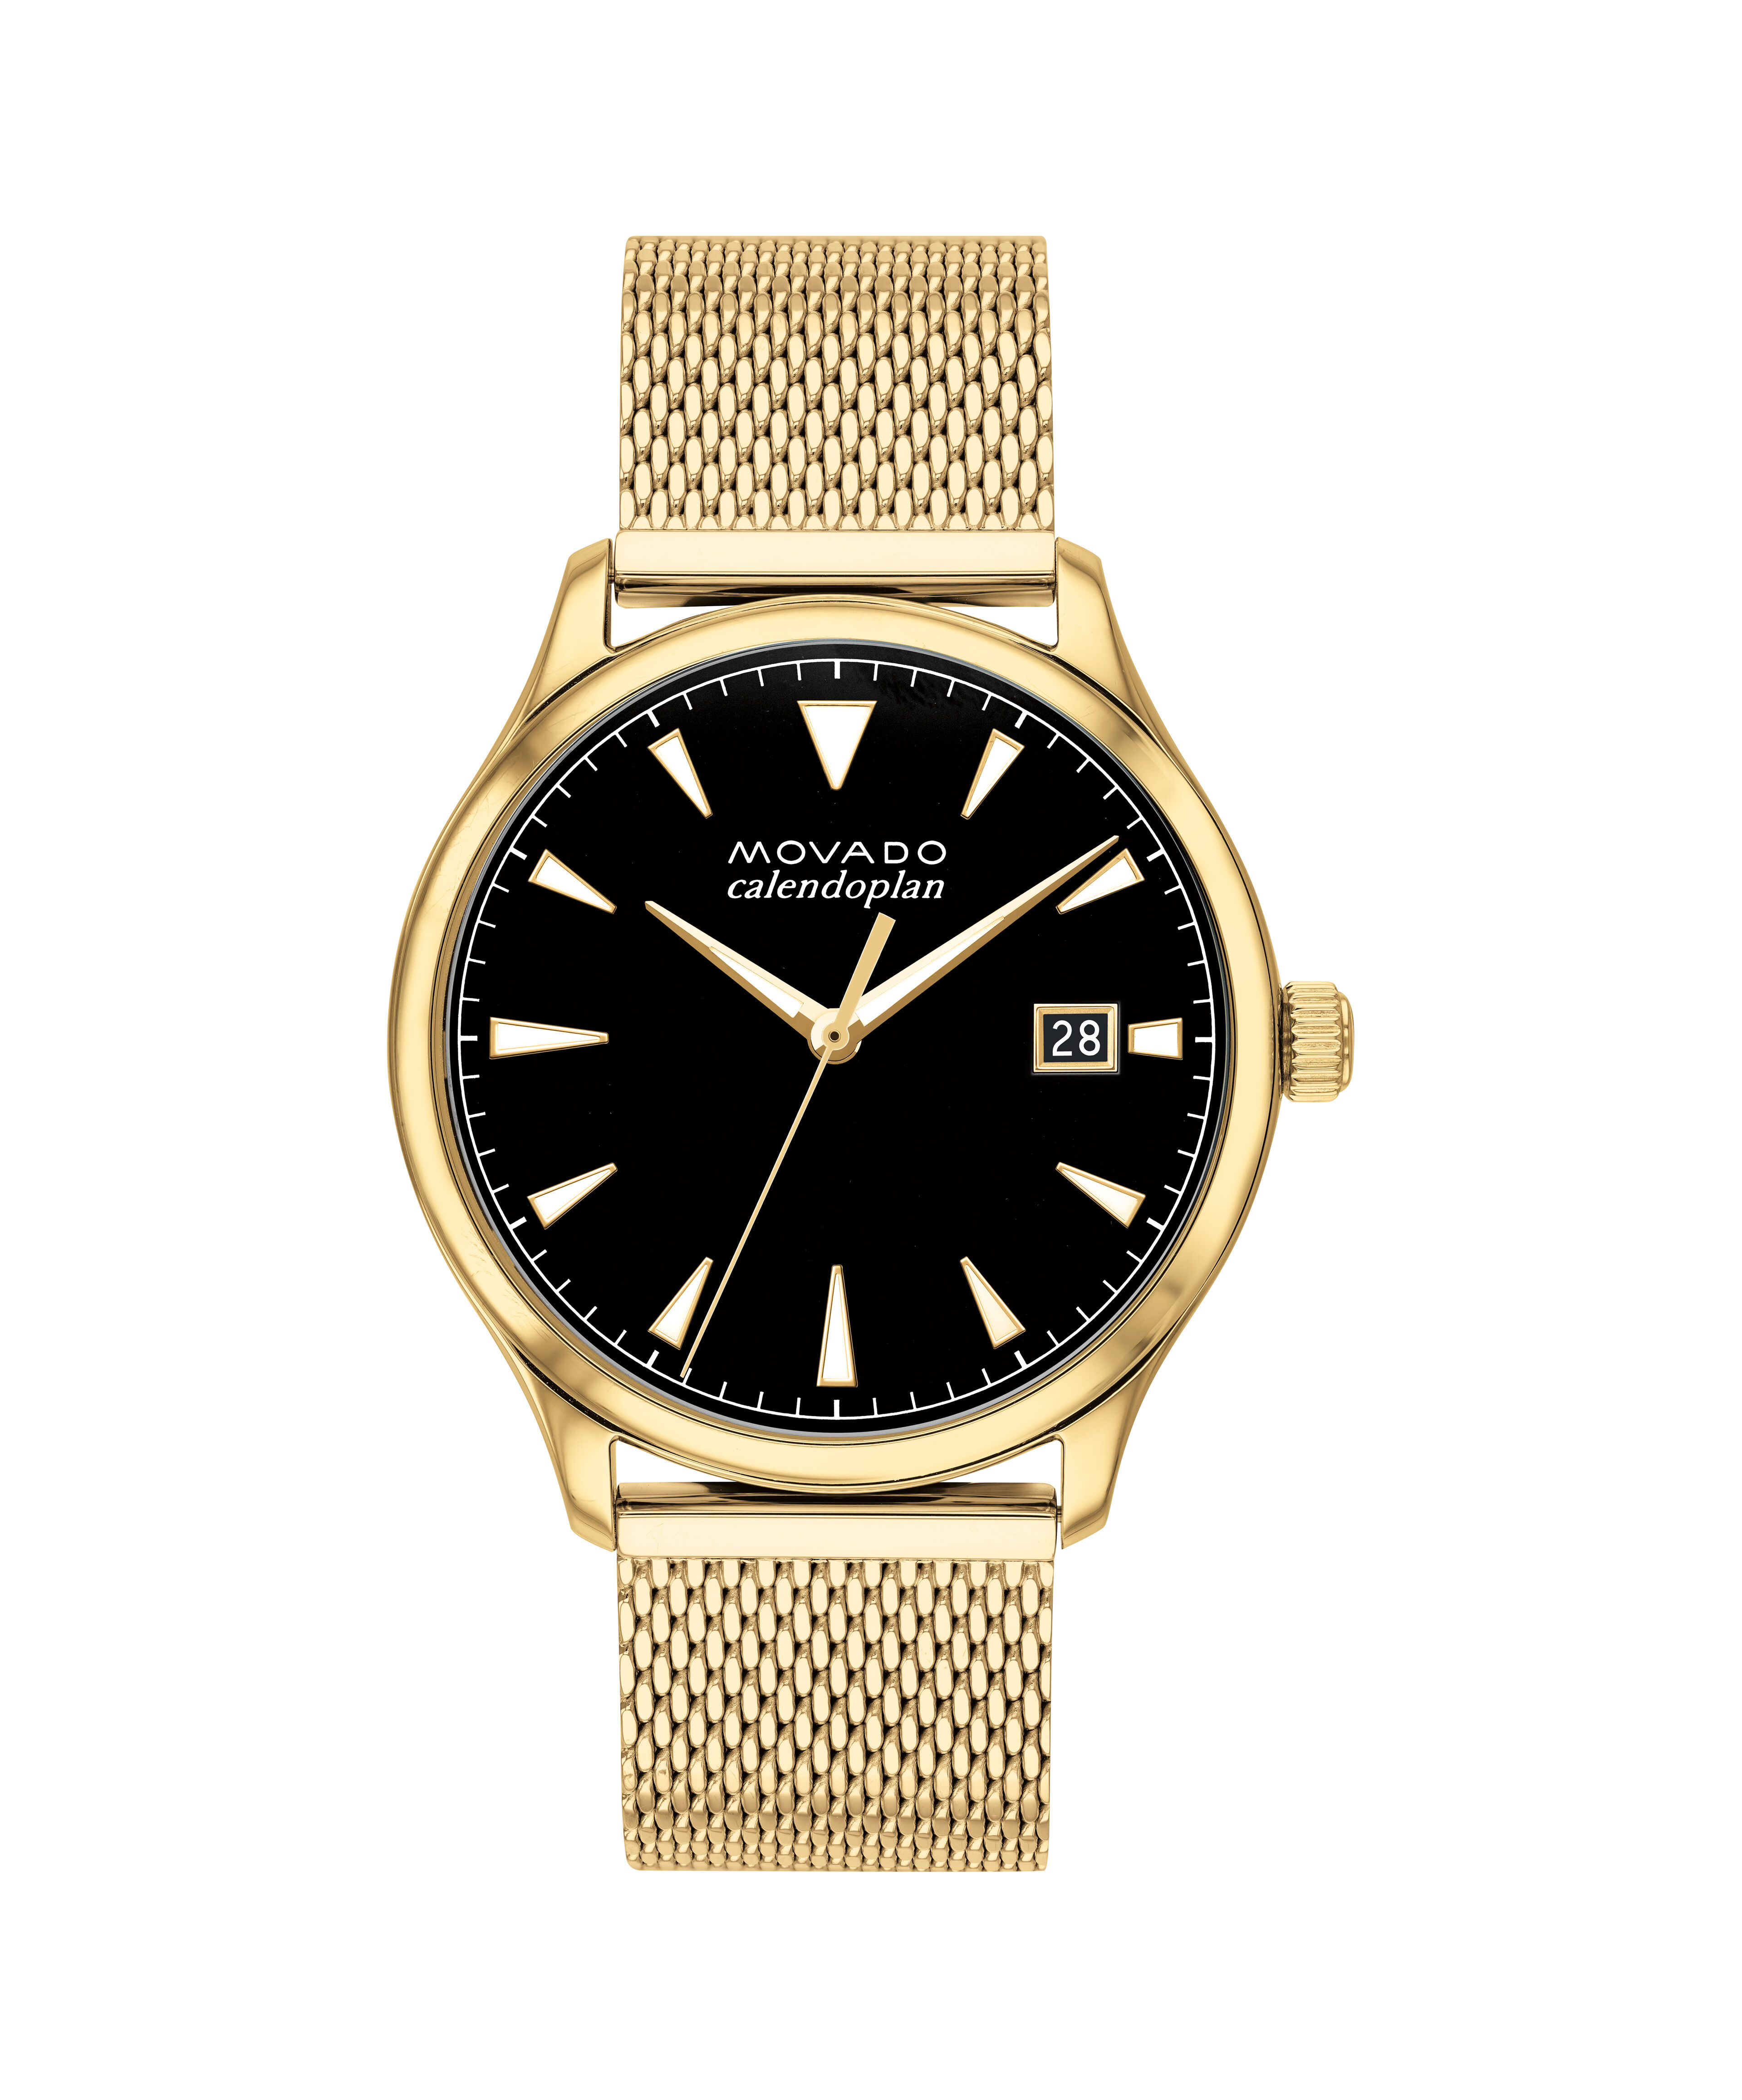 Fake Gold Watches Cheap